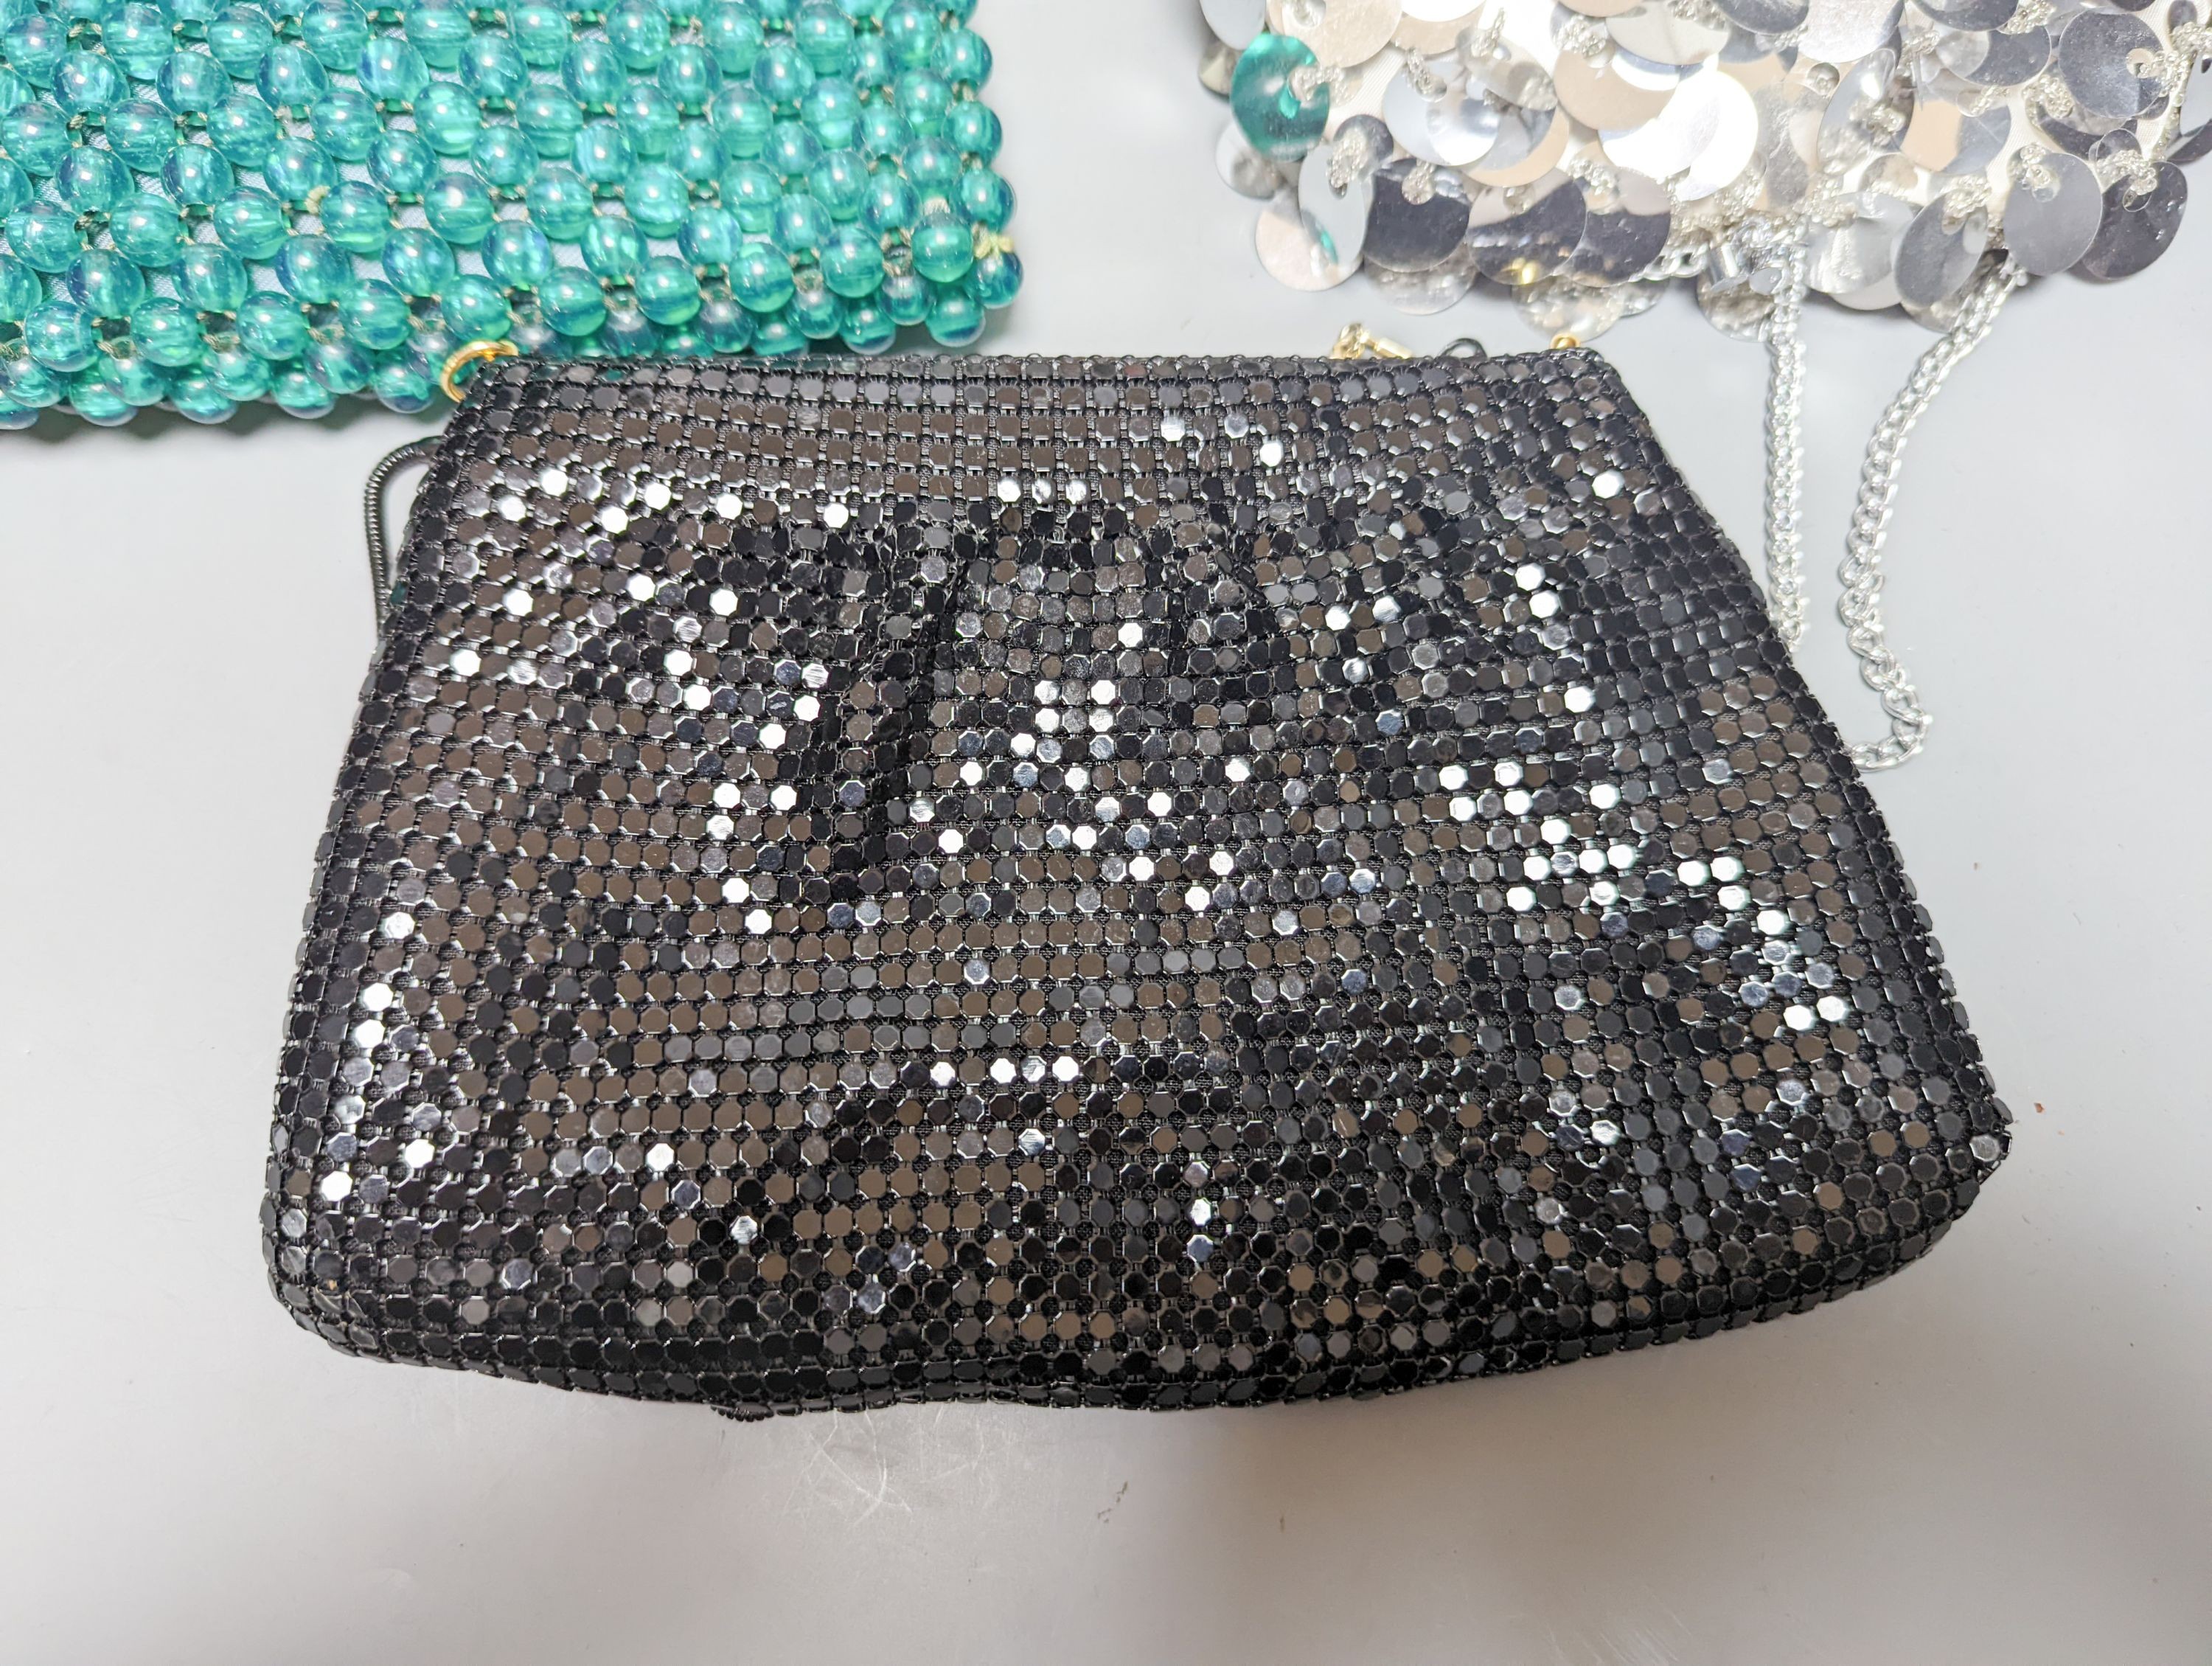 Two American 1950's-60's novelty handbags and three beaded evening bags